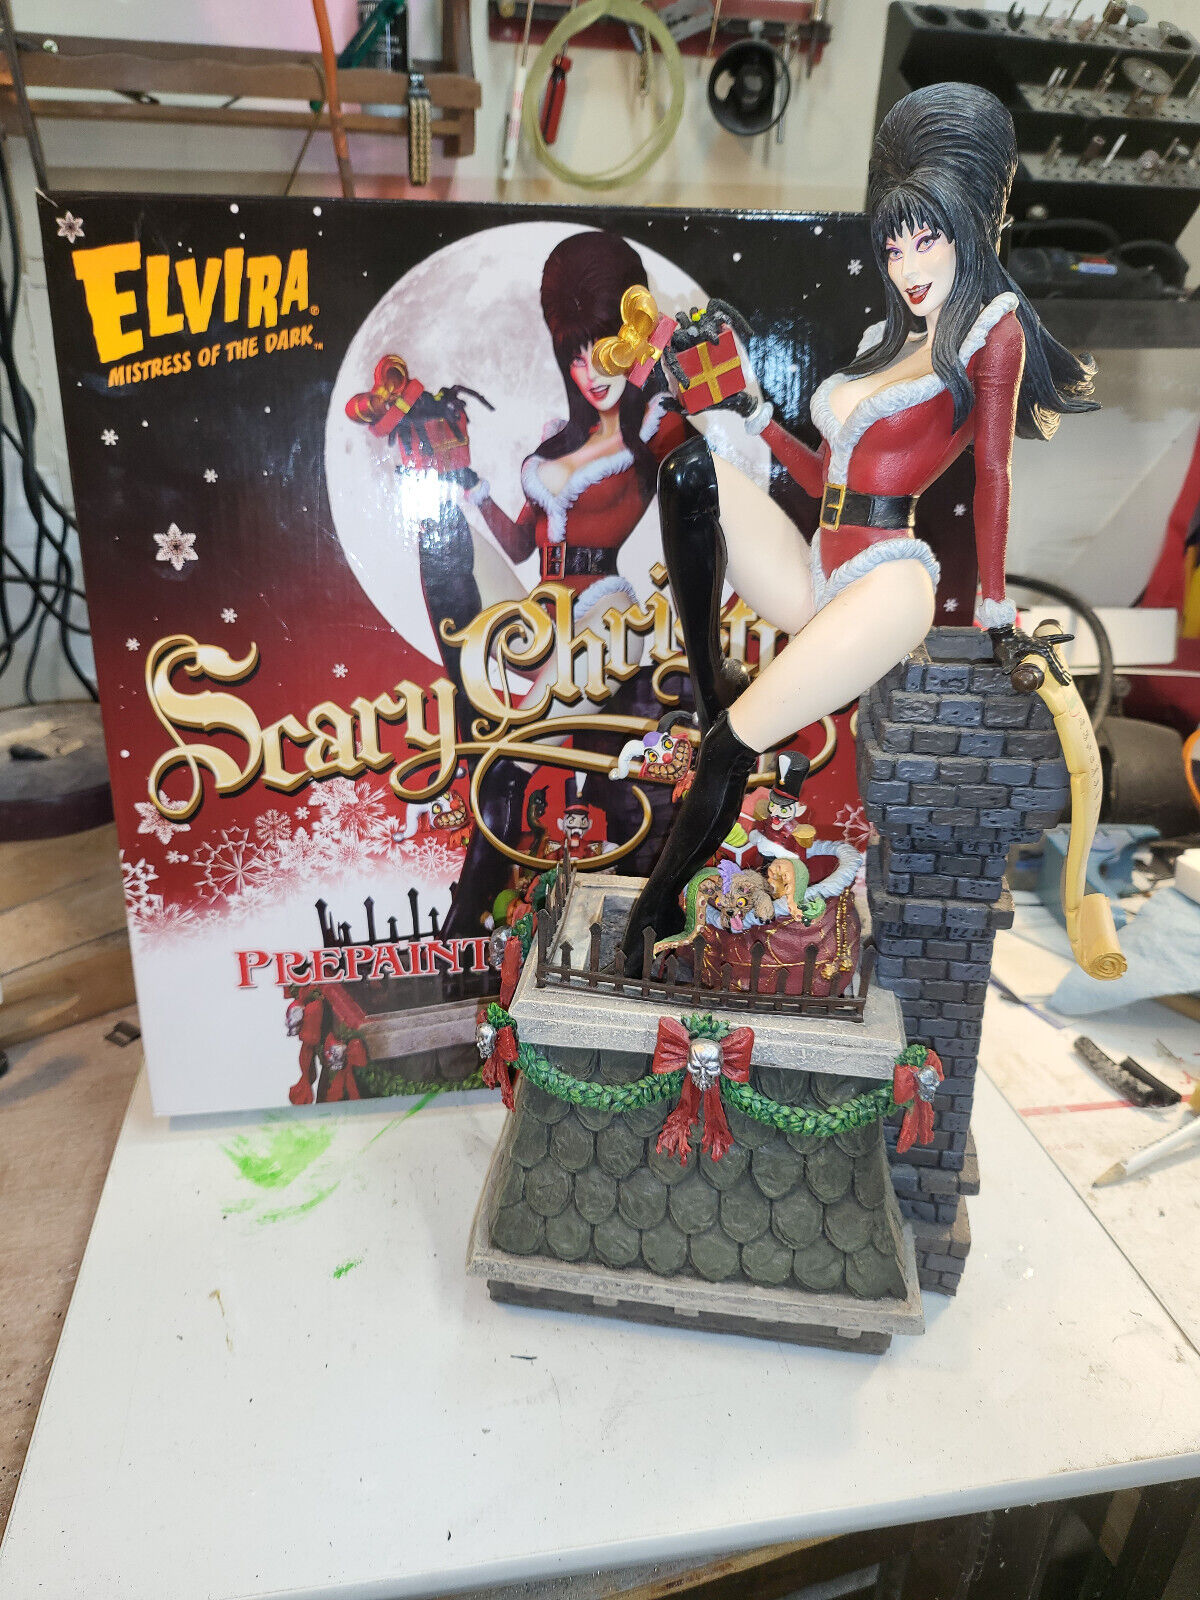 2015 Tweeterhead/Sideshow Elvira Scary Christmas Statue Out Of Production